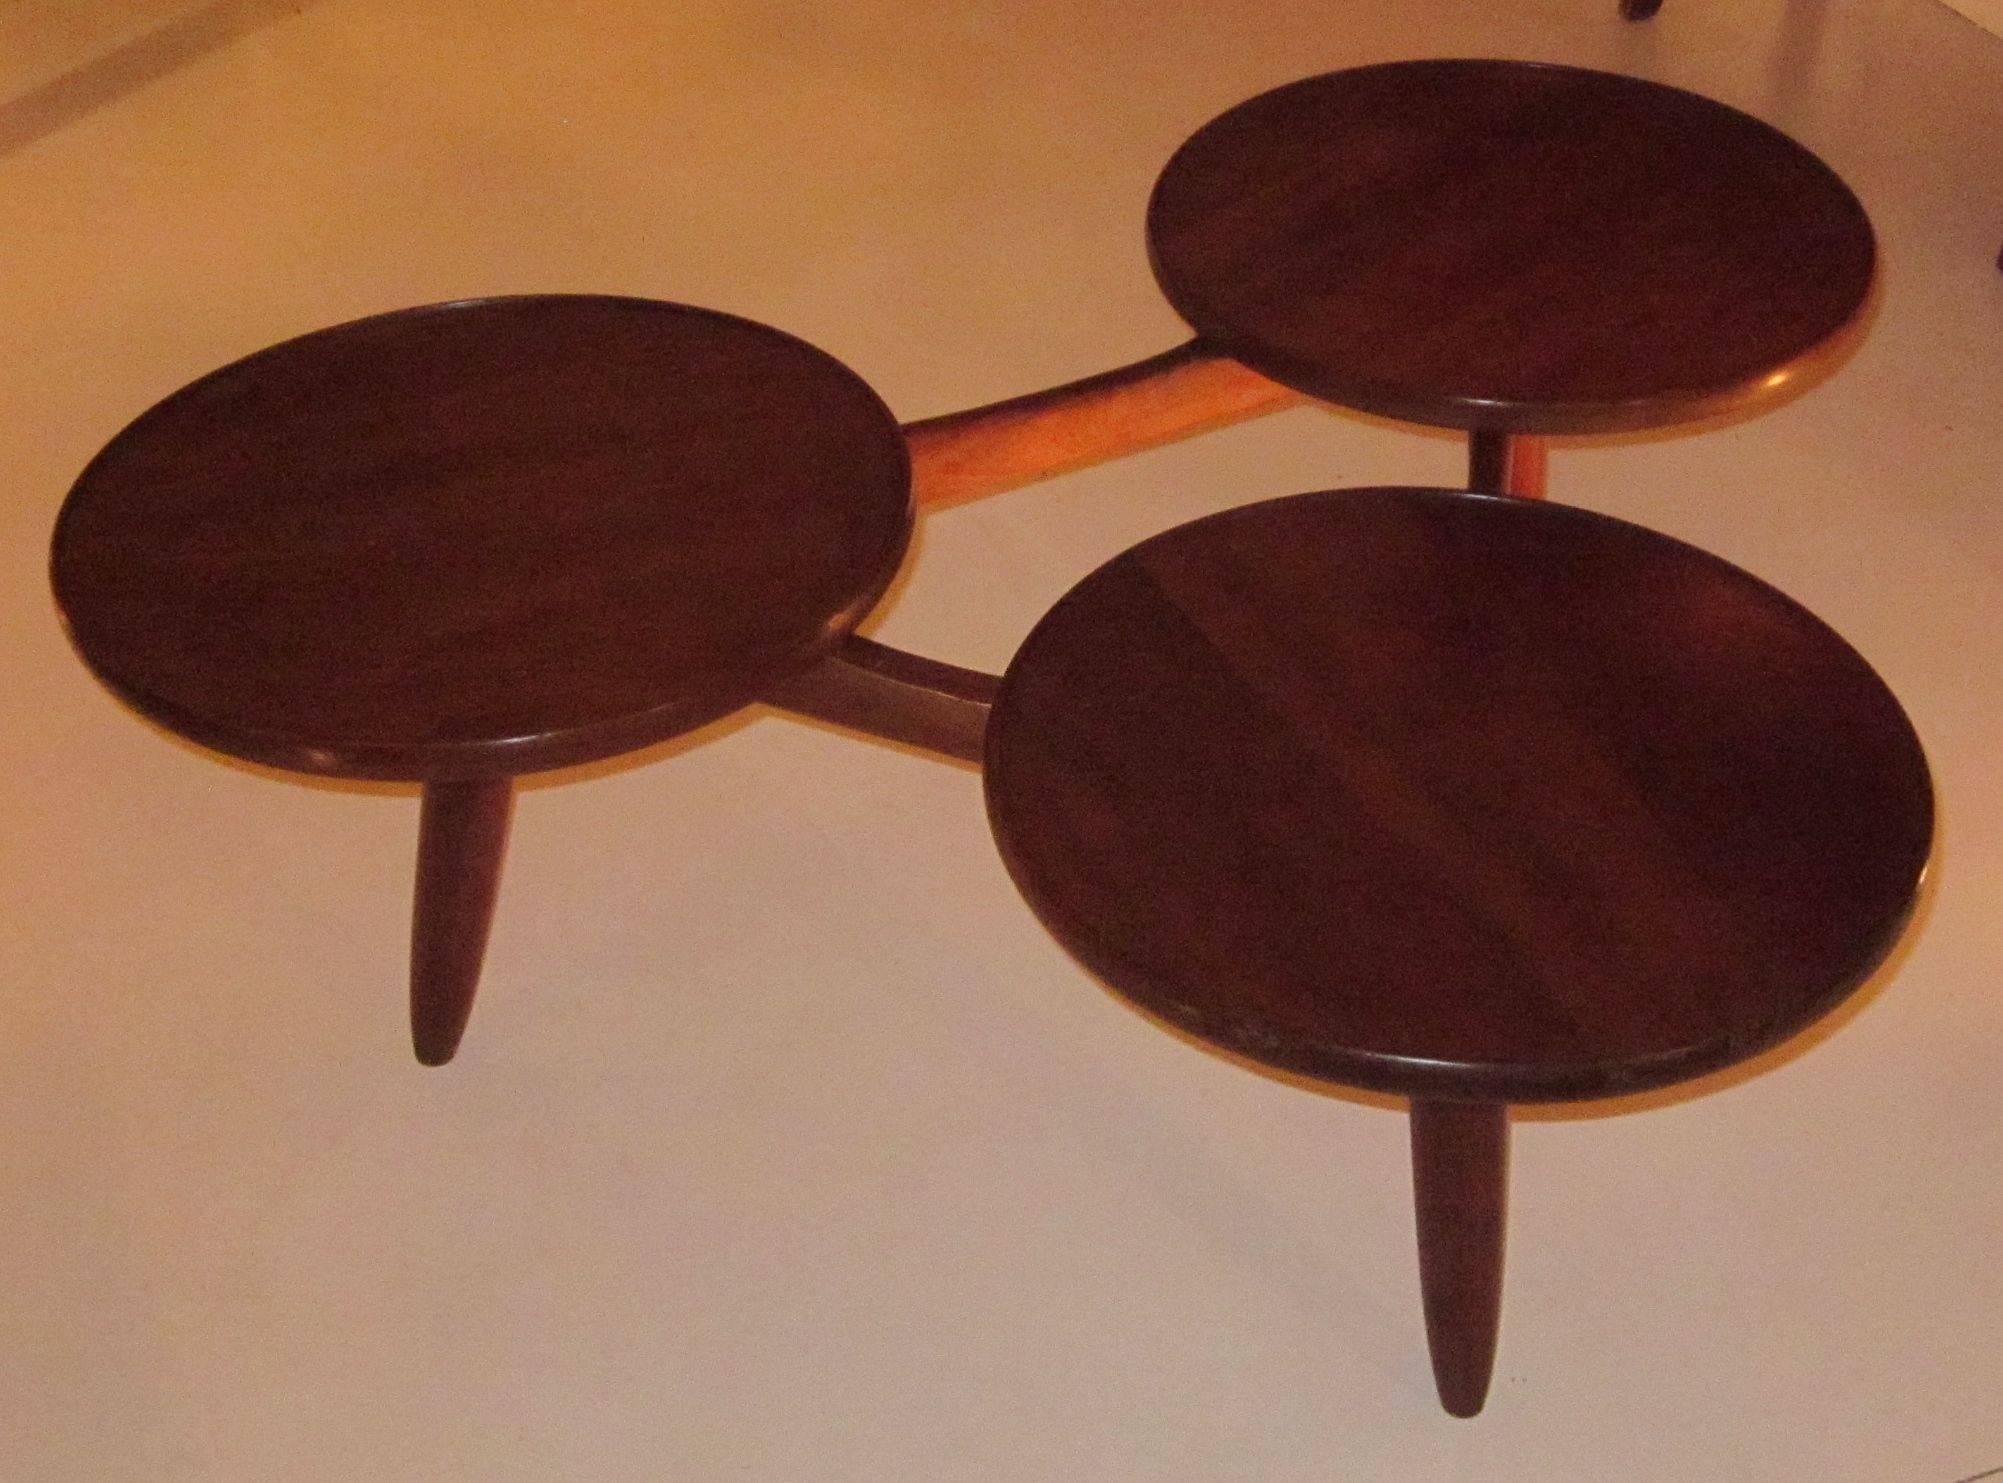 1970s Danish mahogany triple circular top coffee table.
Each of the three connected circles measure 19